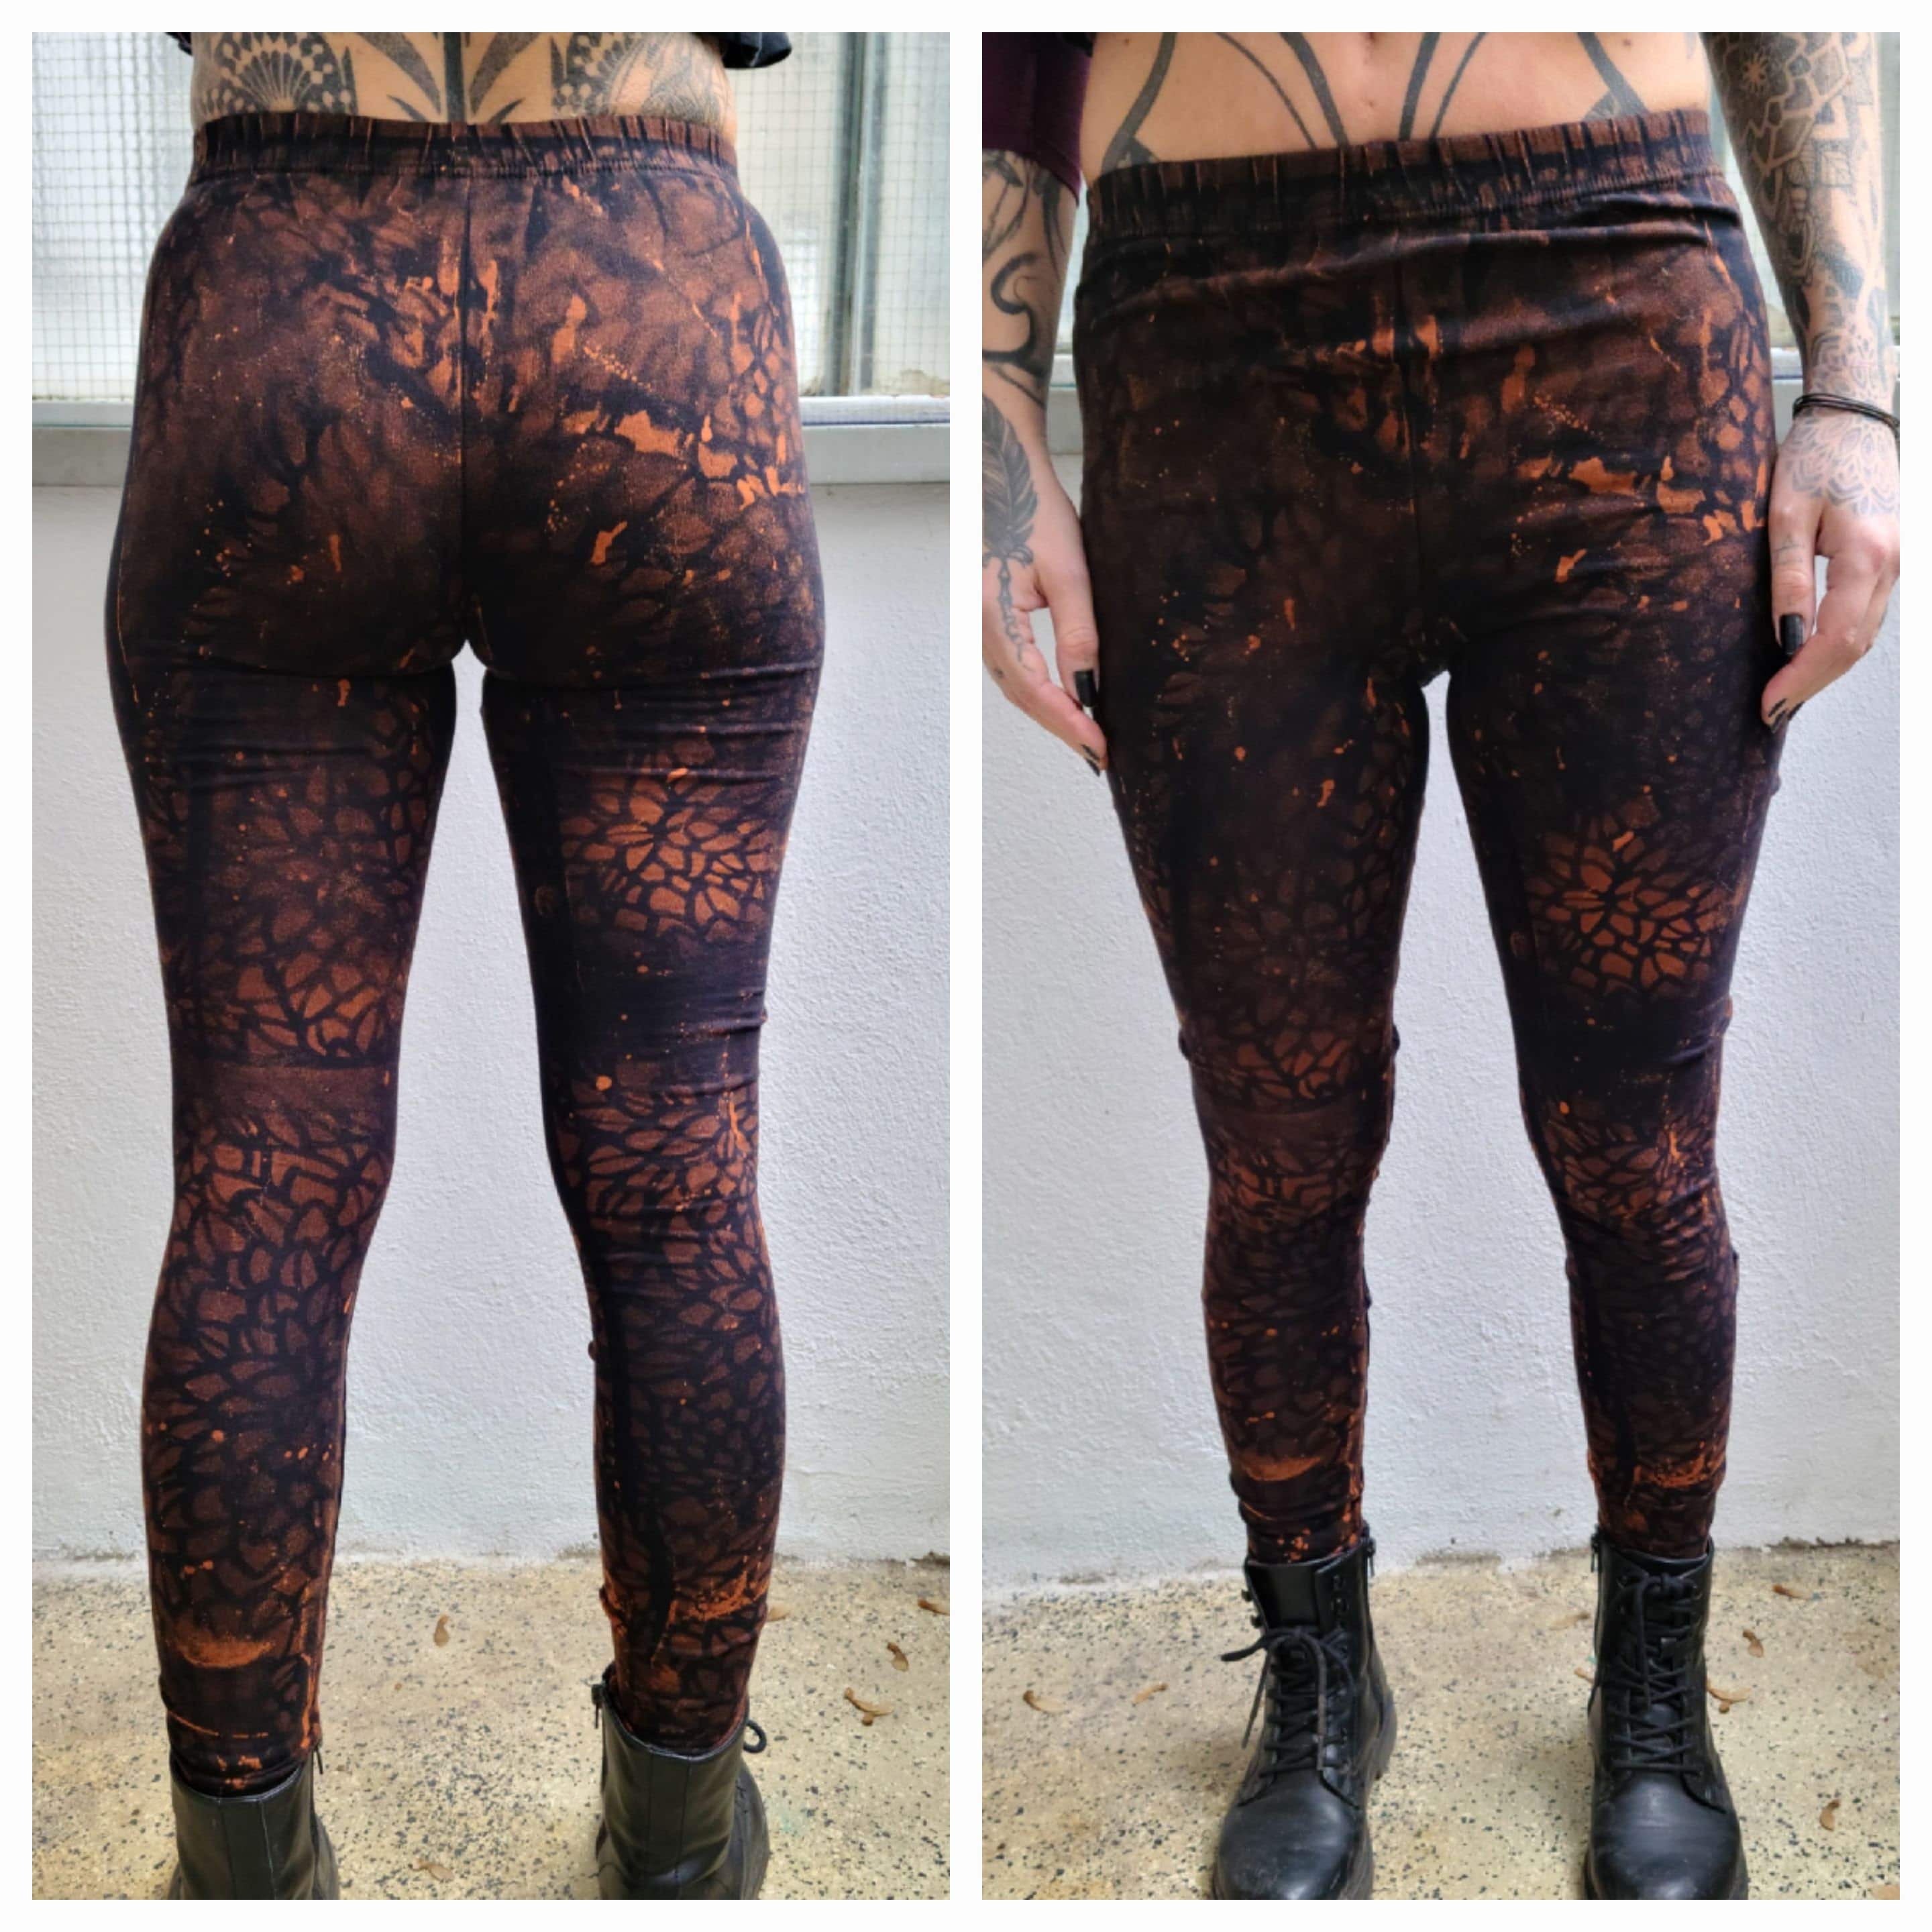 Leggings Labyrinth and Accessories - CEO - Leggings Labyrinth and